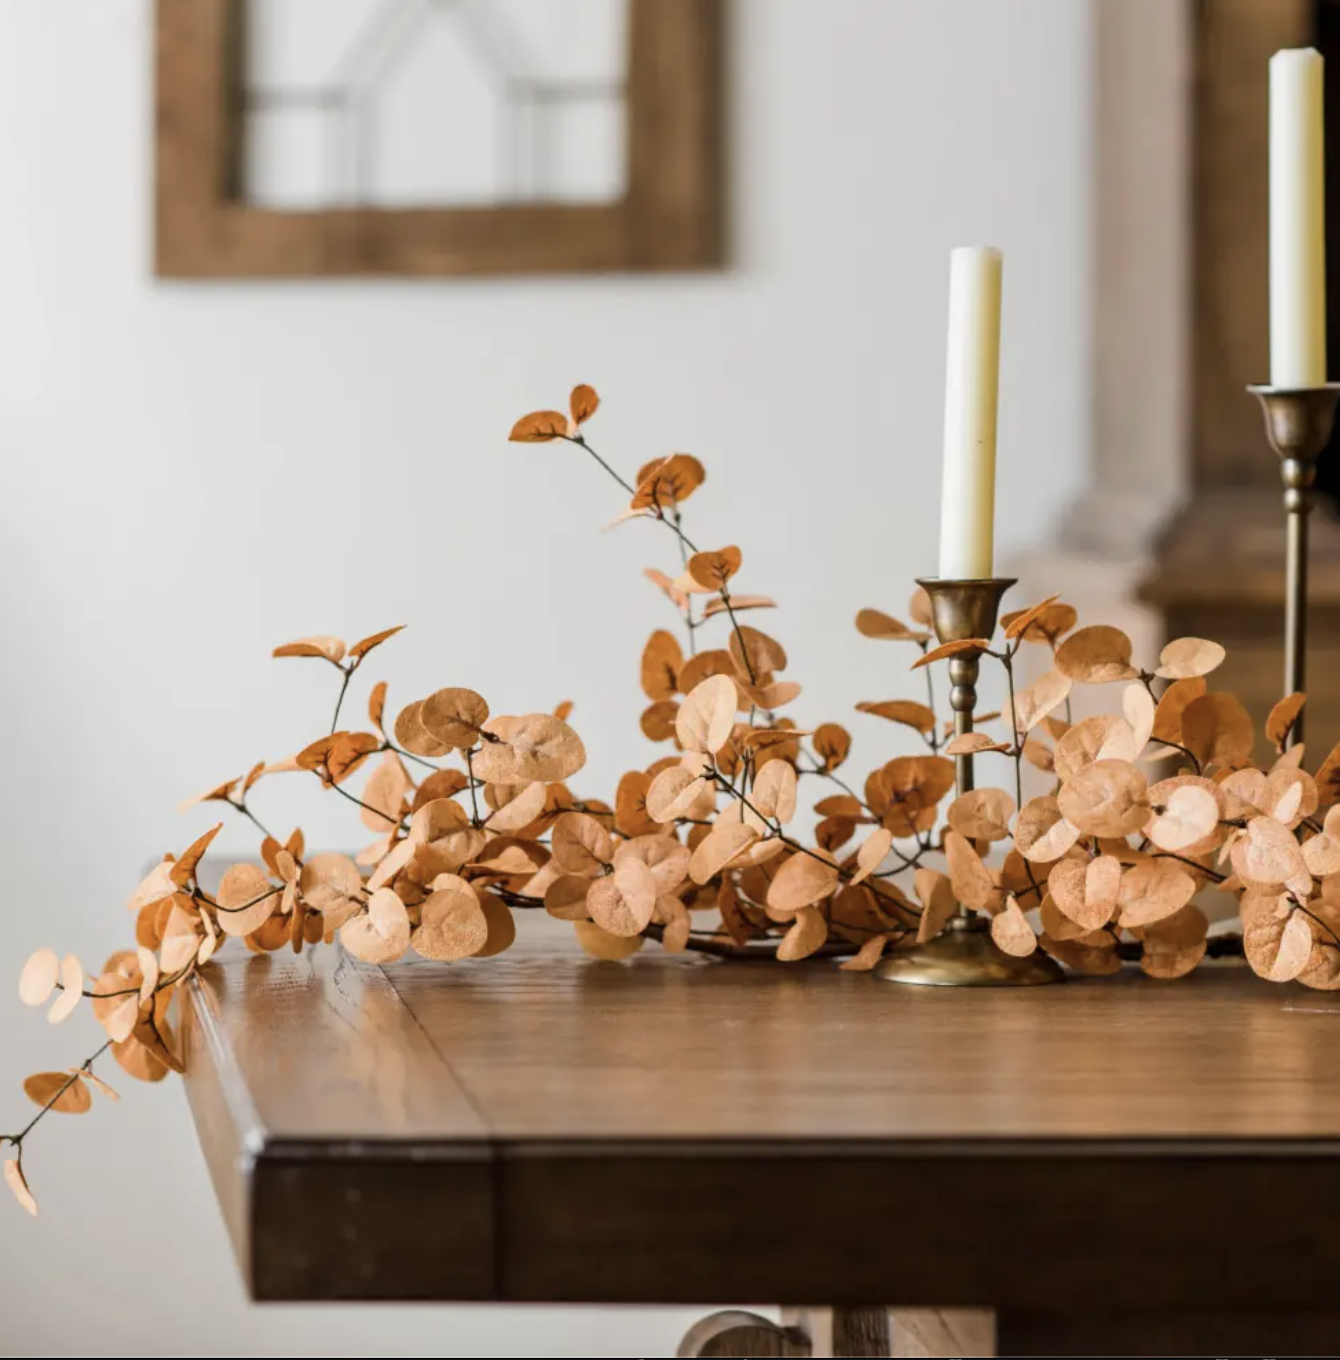 Fill your home with the warm colors of nature with this Light Sienna Eucalyptus Garland.